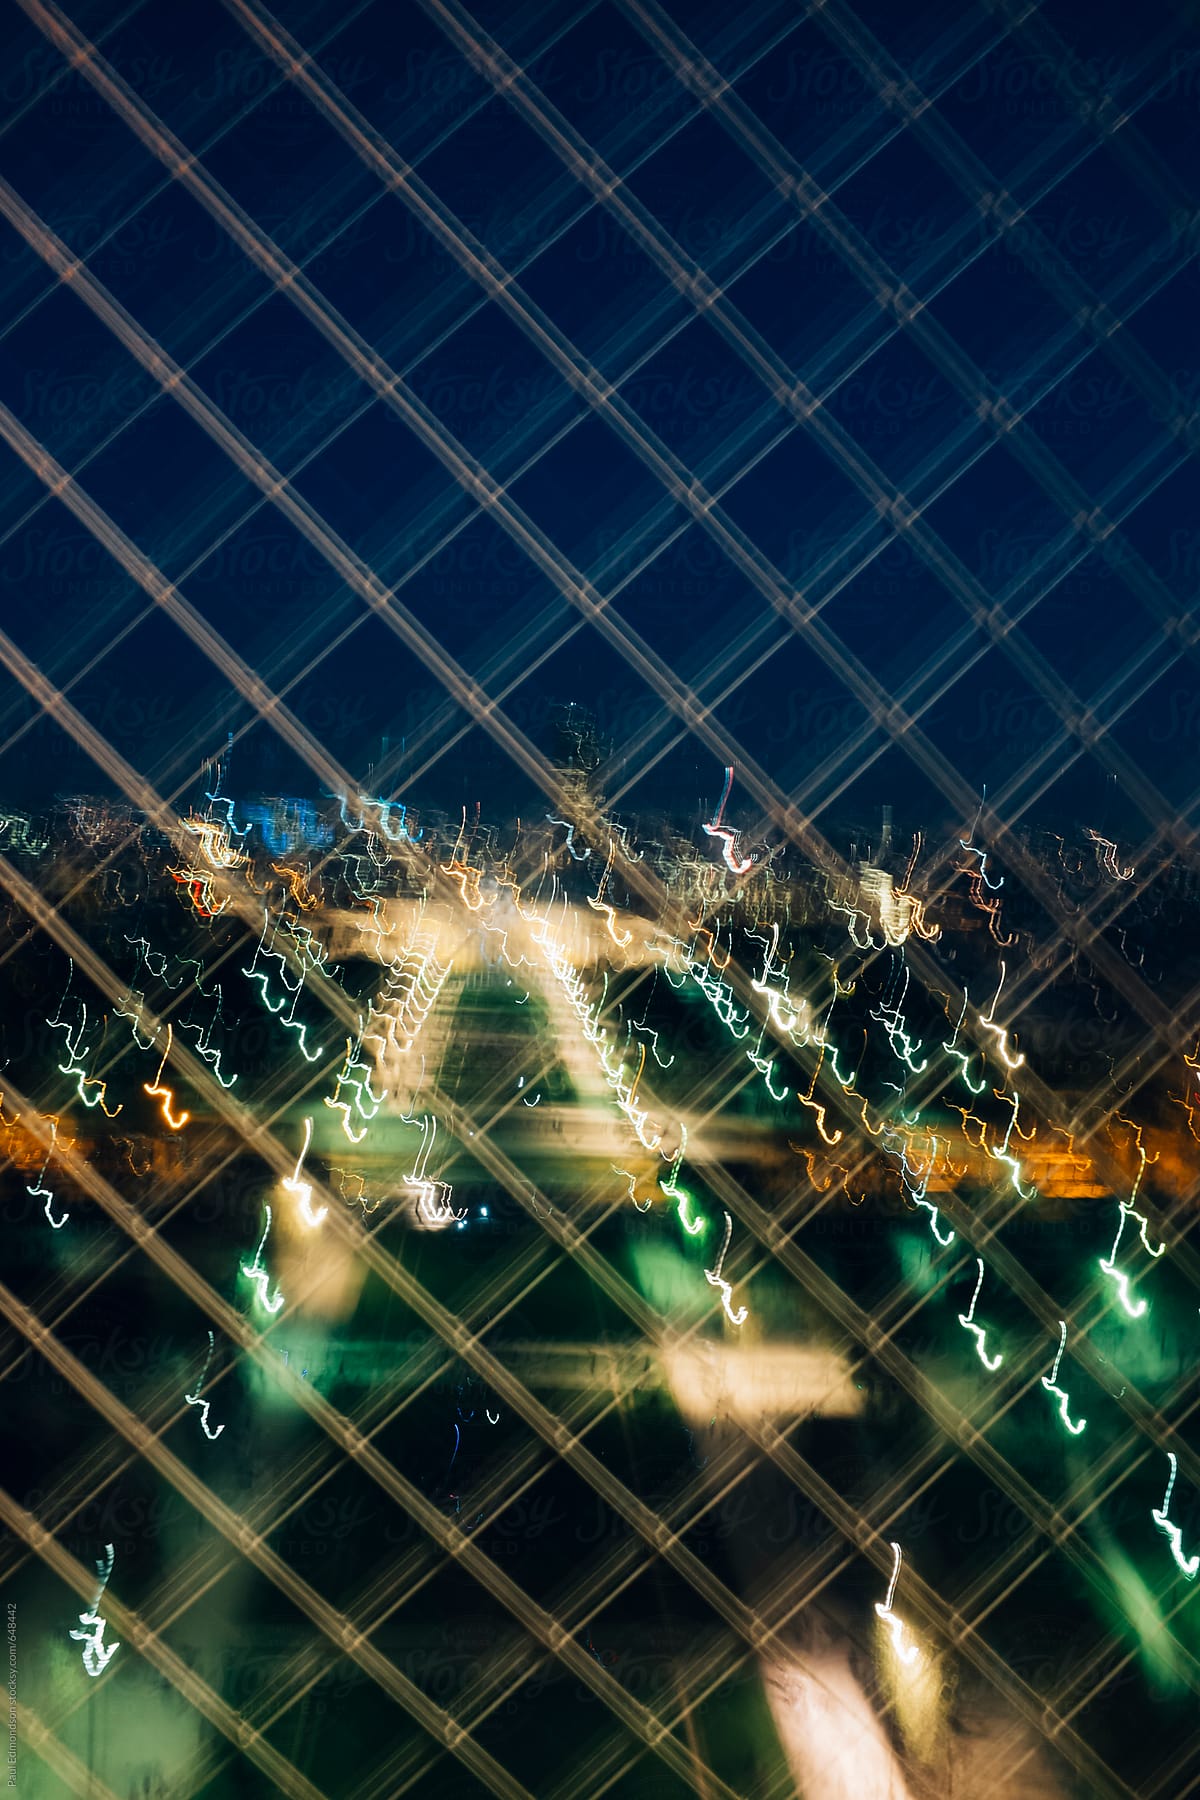 Blurred view of Paris skyline at night, from the Eiffel Tower